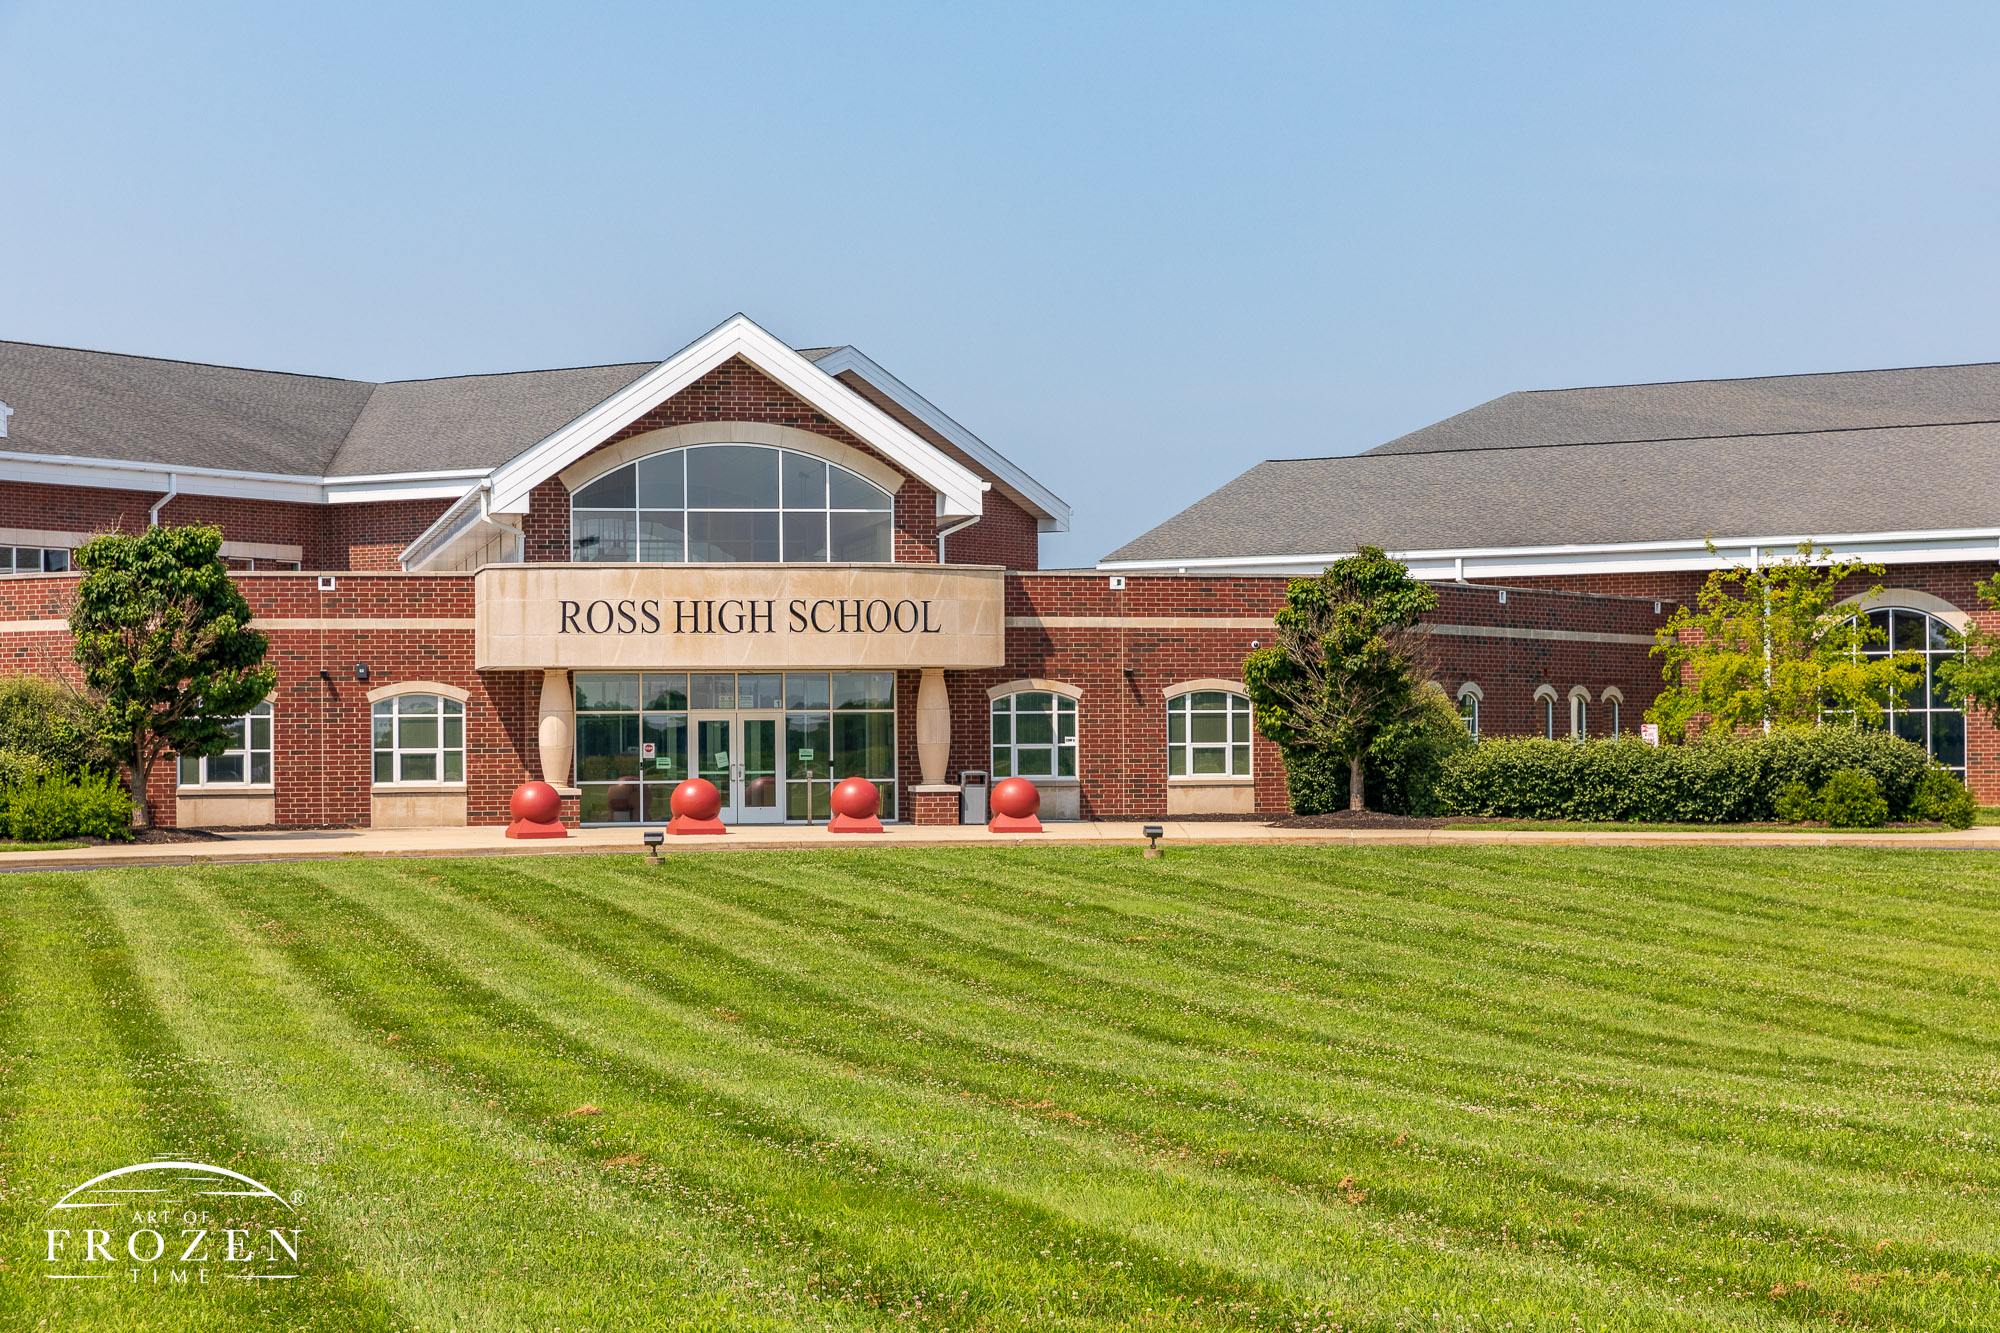 The school entrance of Ross High School in Butler County, Ohio.